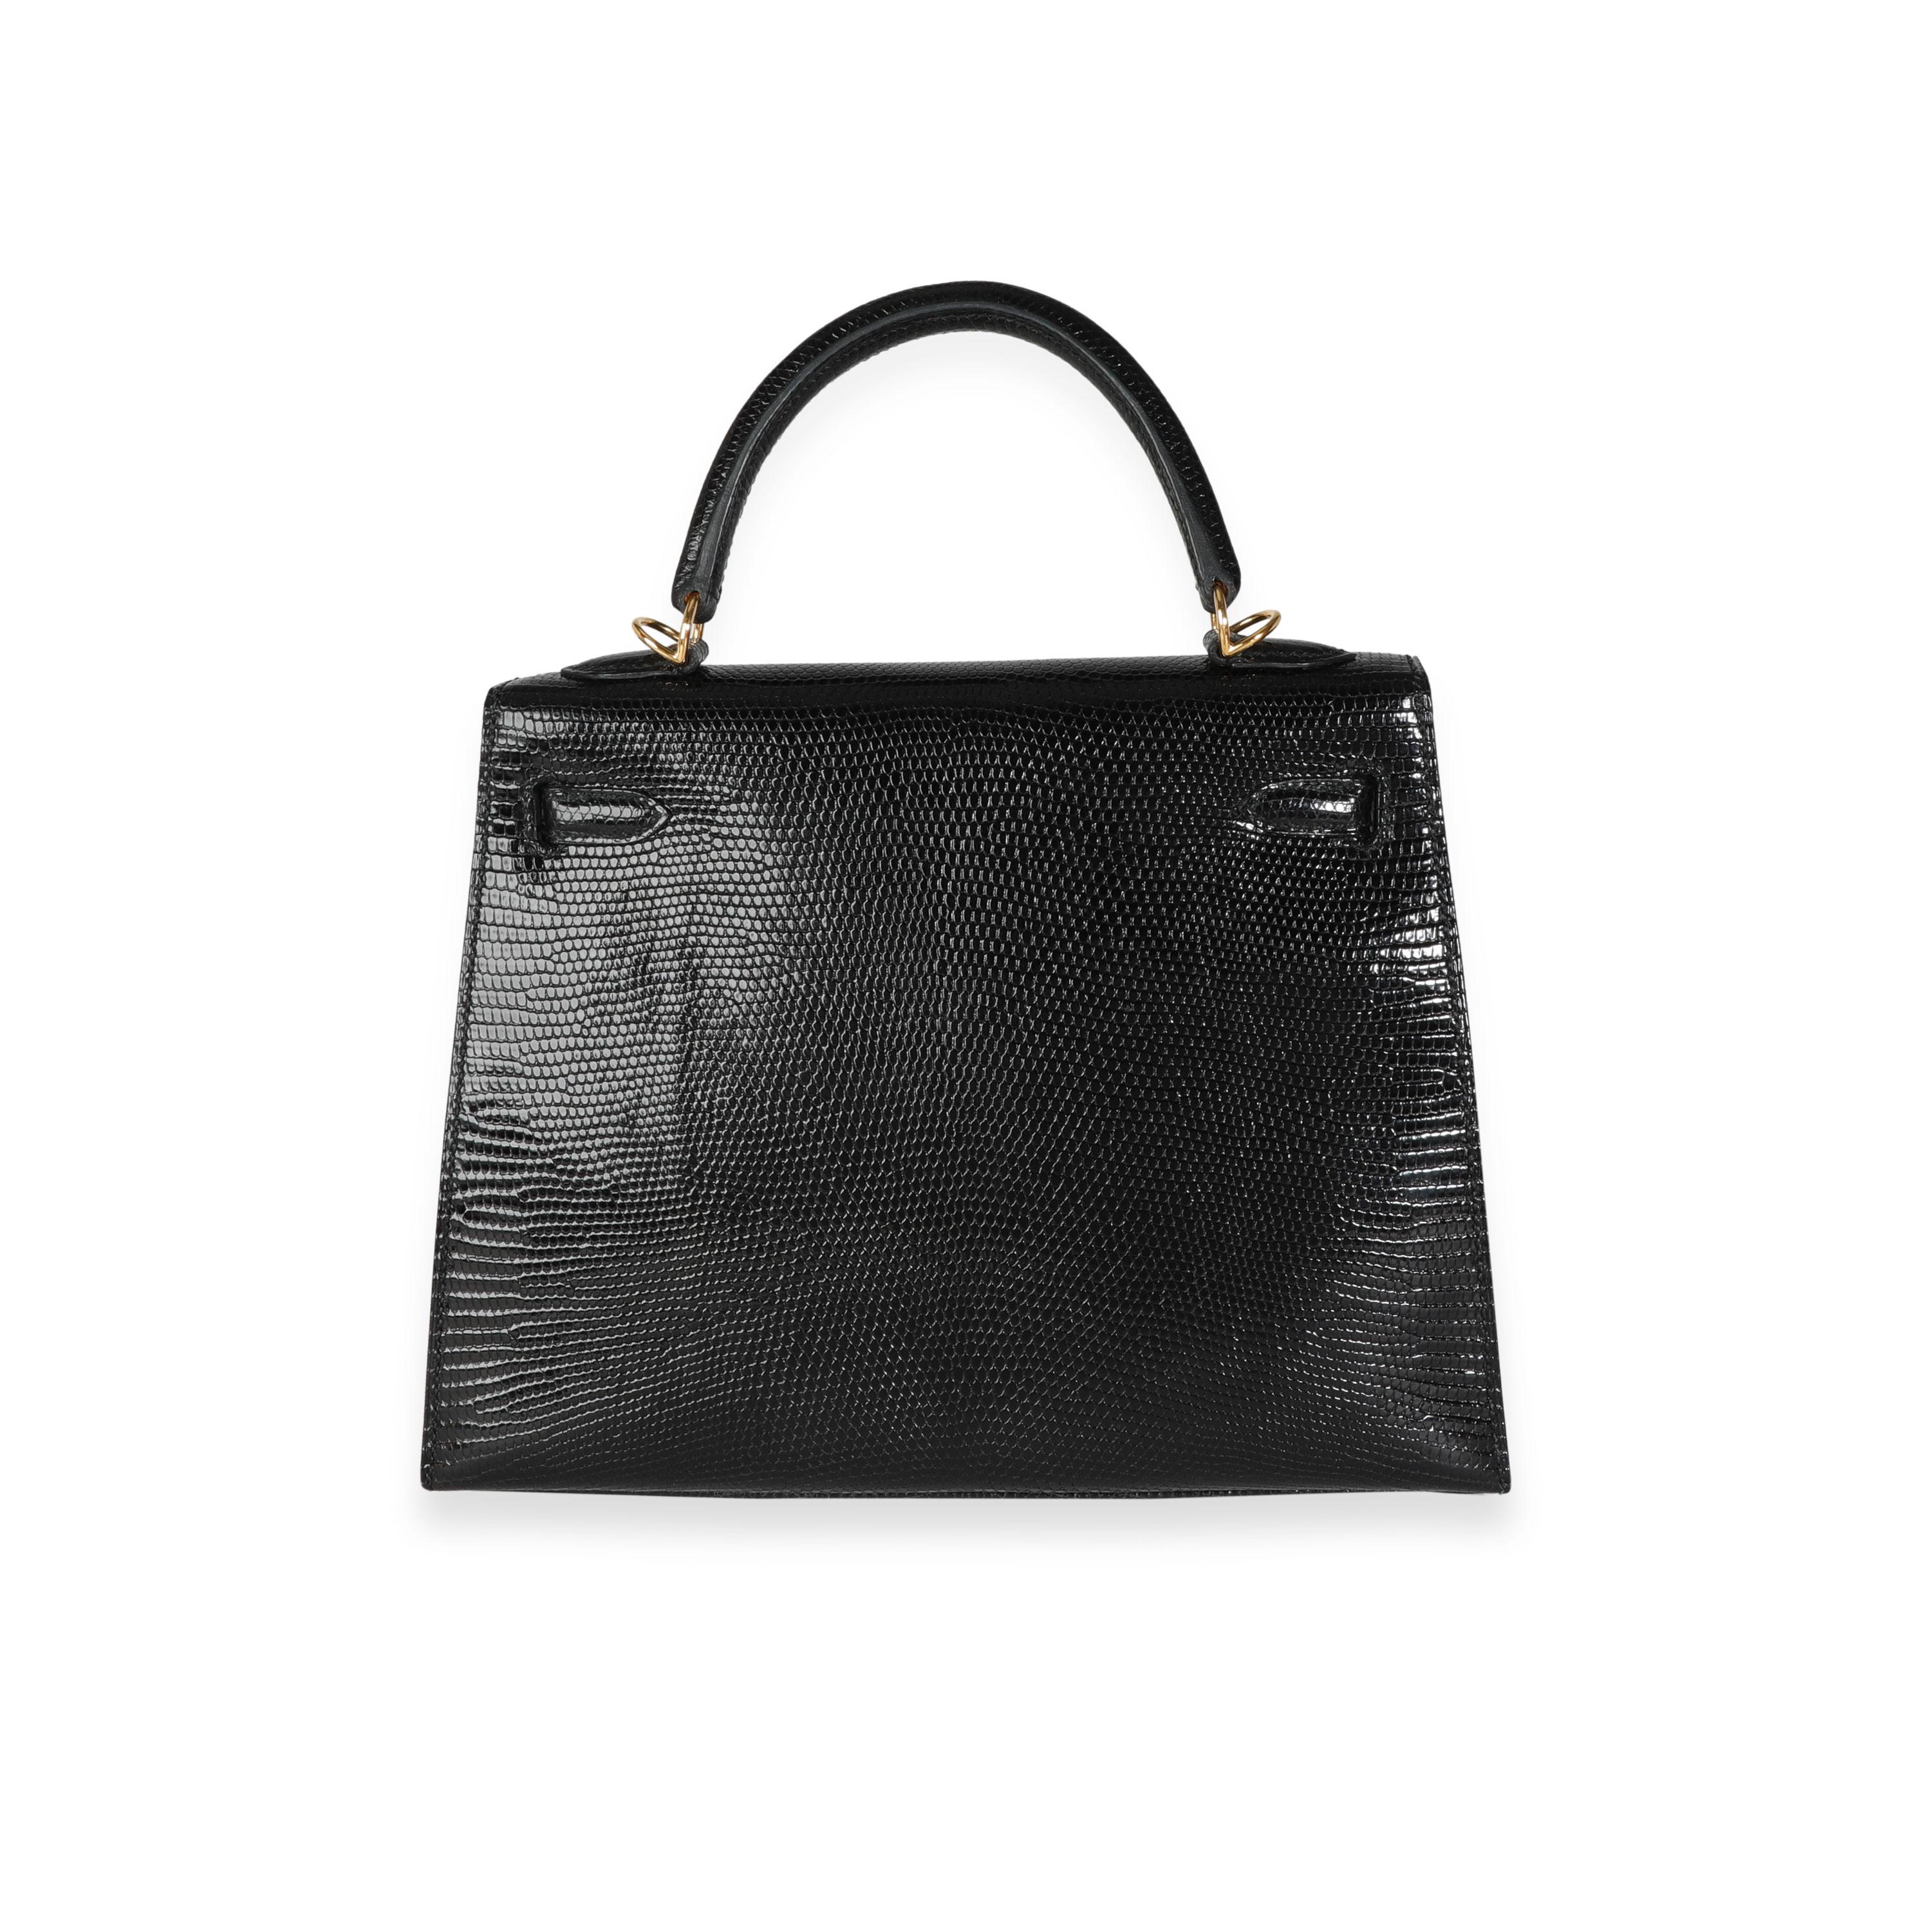 Listing Title: Hermès Black Shiny Lizard Sellier Kelly 25 GHW
SKU: 115414
Condition: Pre-owned (3000)
Handbag Condition: Very Good
Condition Comments: Very Good Condition. Light scratching to hardware. Faint marks to skin. Please note: this item can